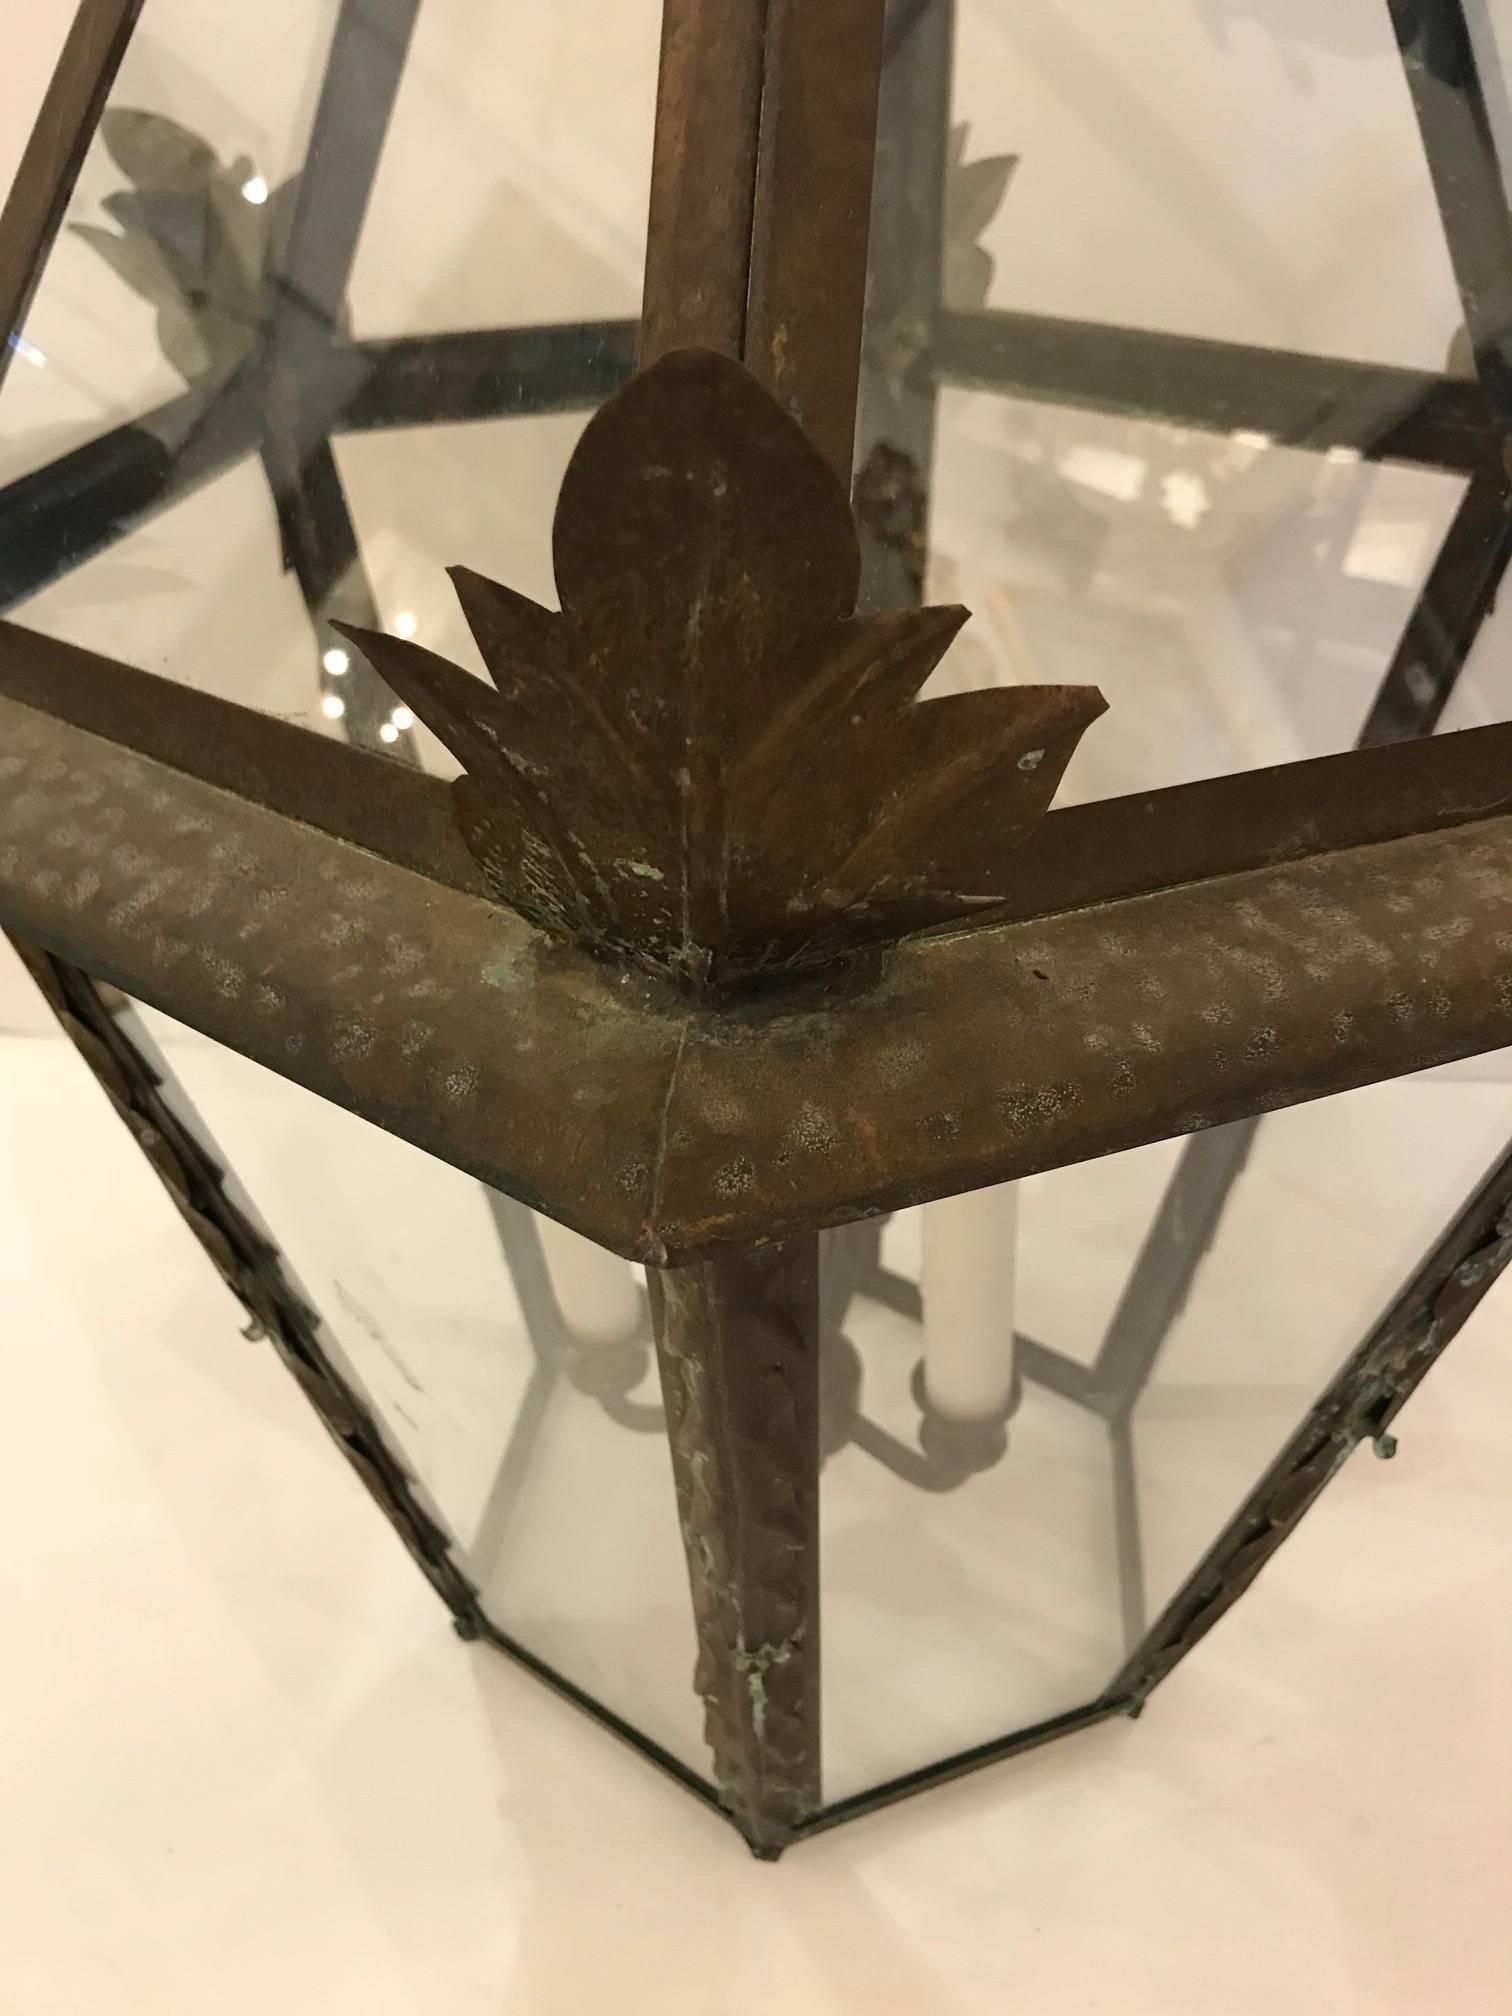 Wonderful large French copper lantern with Verdigris finish having decorative leaves around the top periphery and three lights, 60 watt each with white wax candle sleeves.
18 inches of chain included and original ceiling cap.